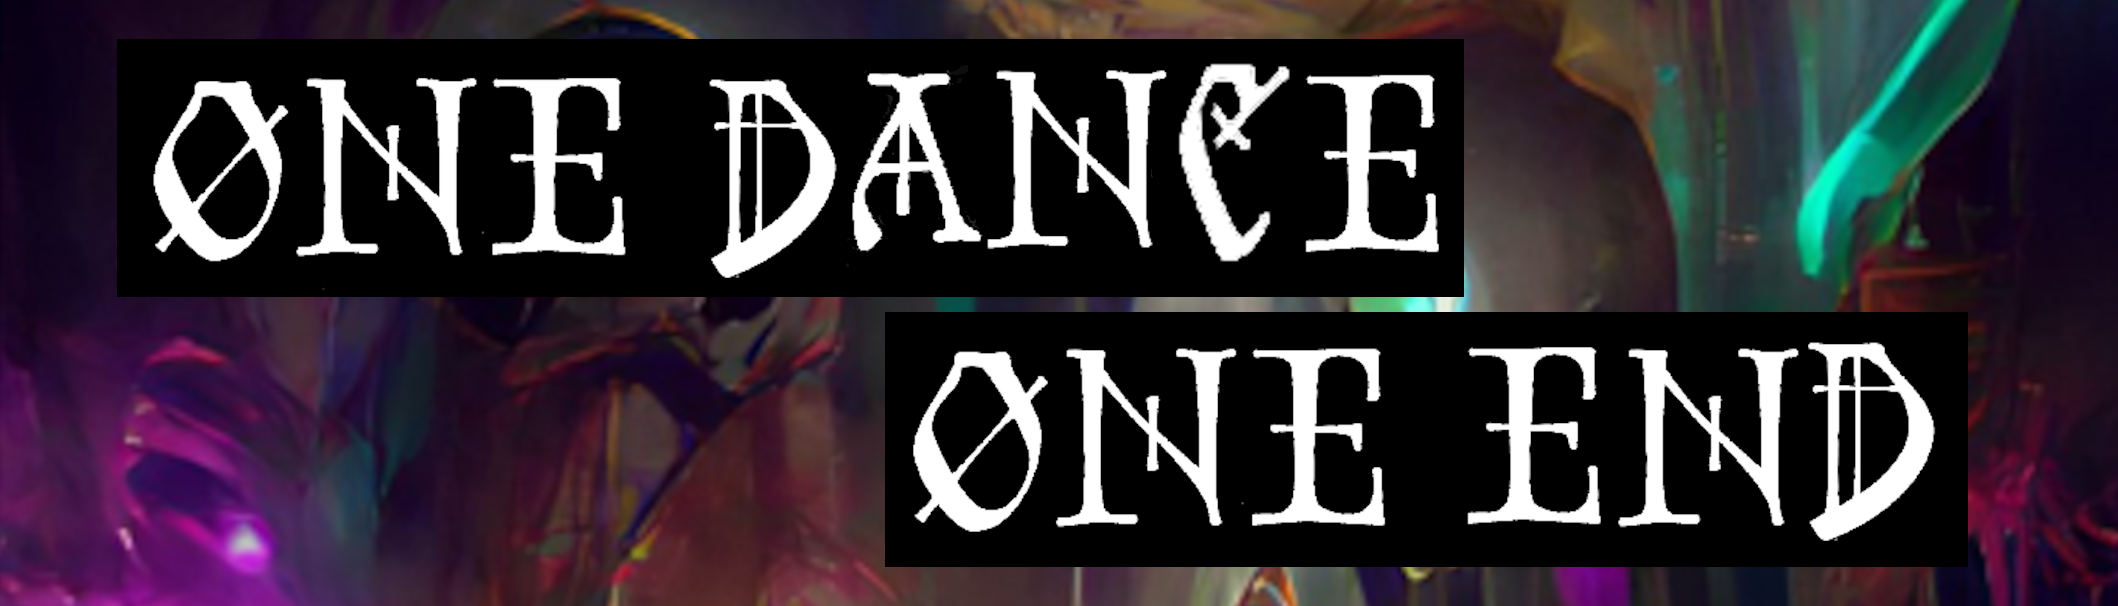 One Dance, One End